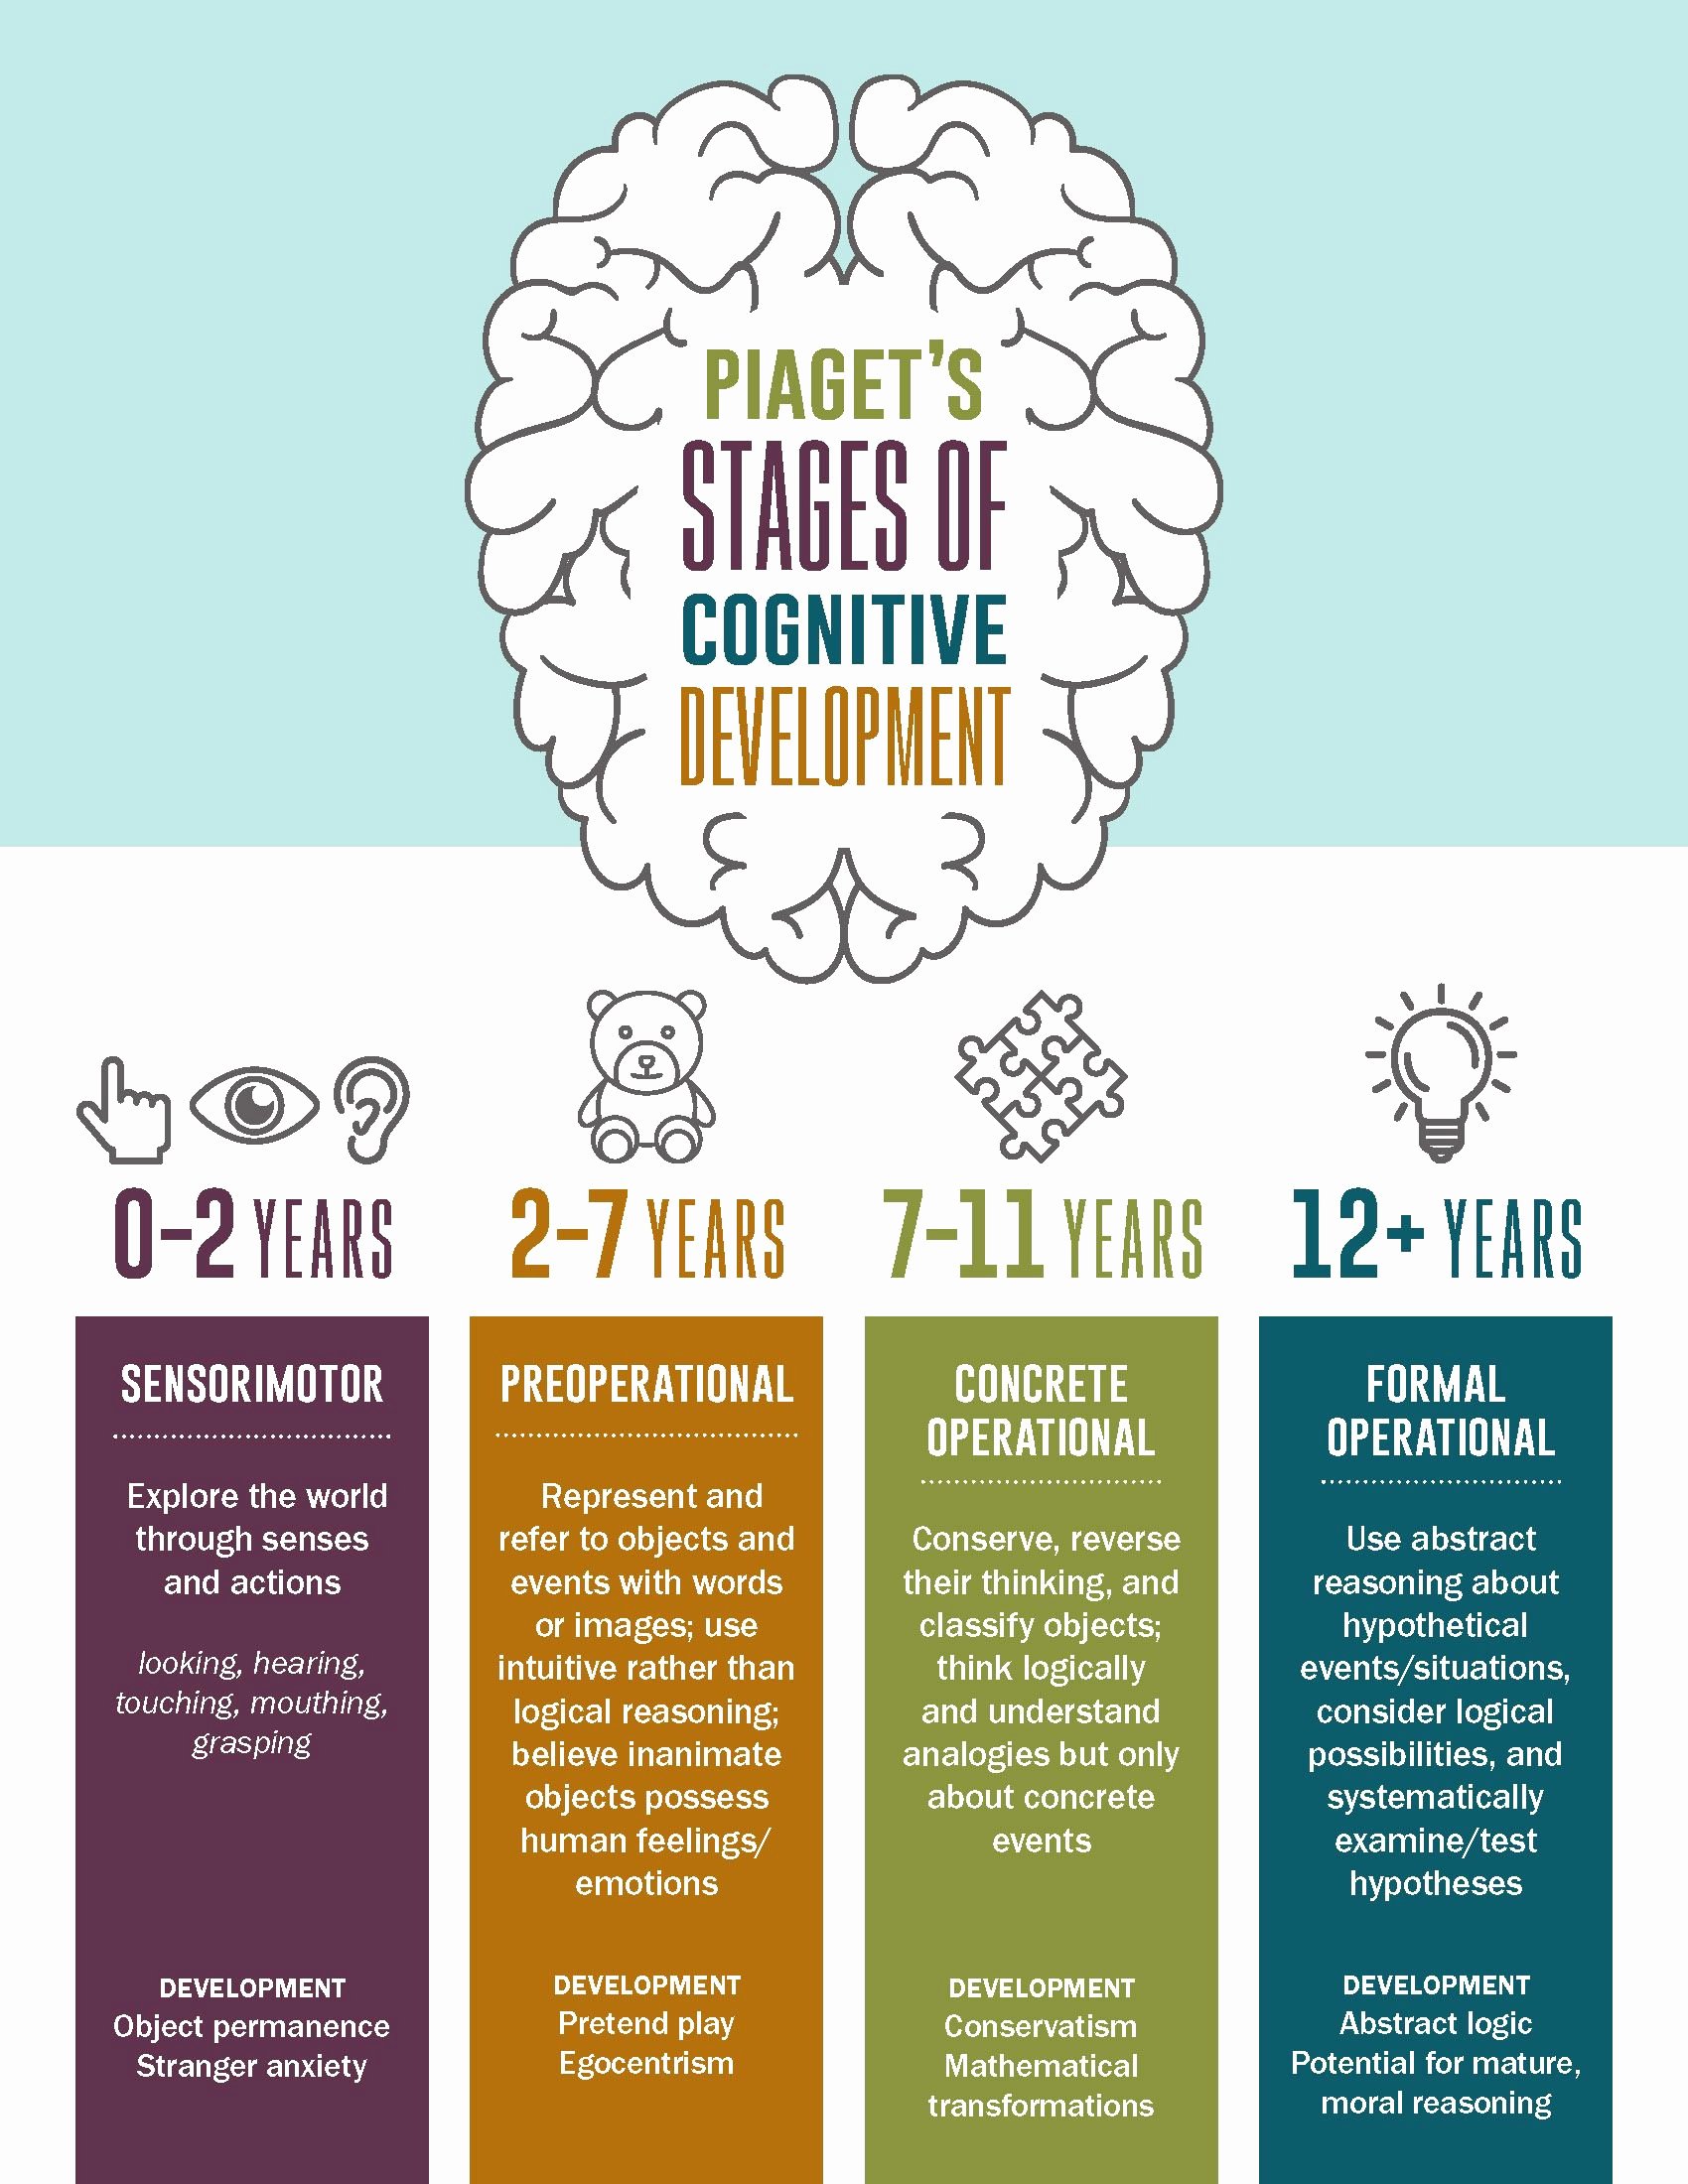 Piaget 4 Stages Of Cognitive Development Chart Luxury Pia S Four Stages Of Cognitive Development Infographic